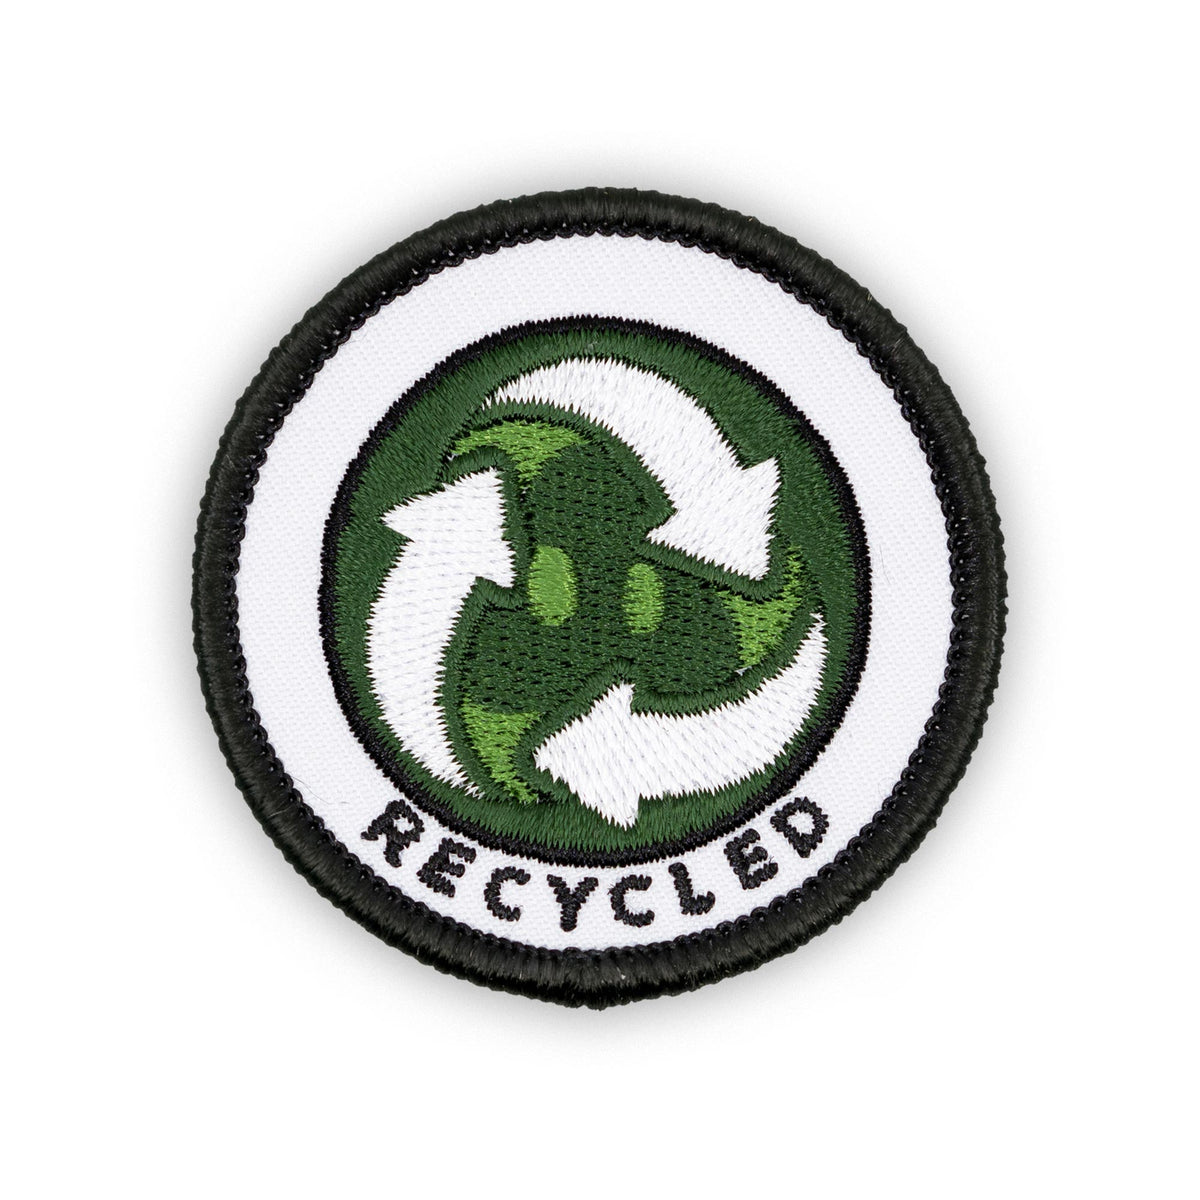 Recycled adulting merit badge patch for adults